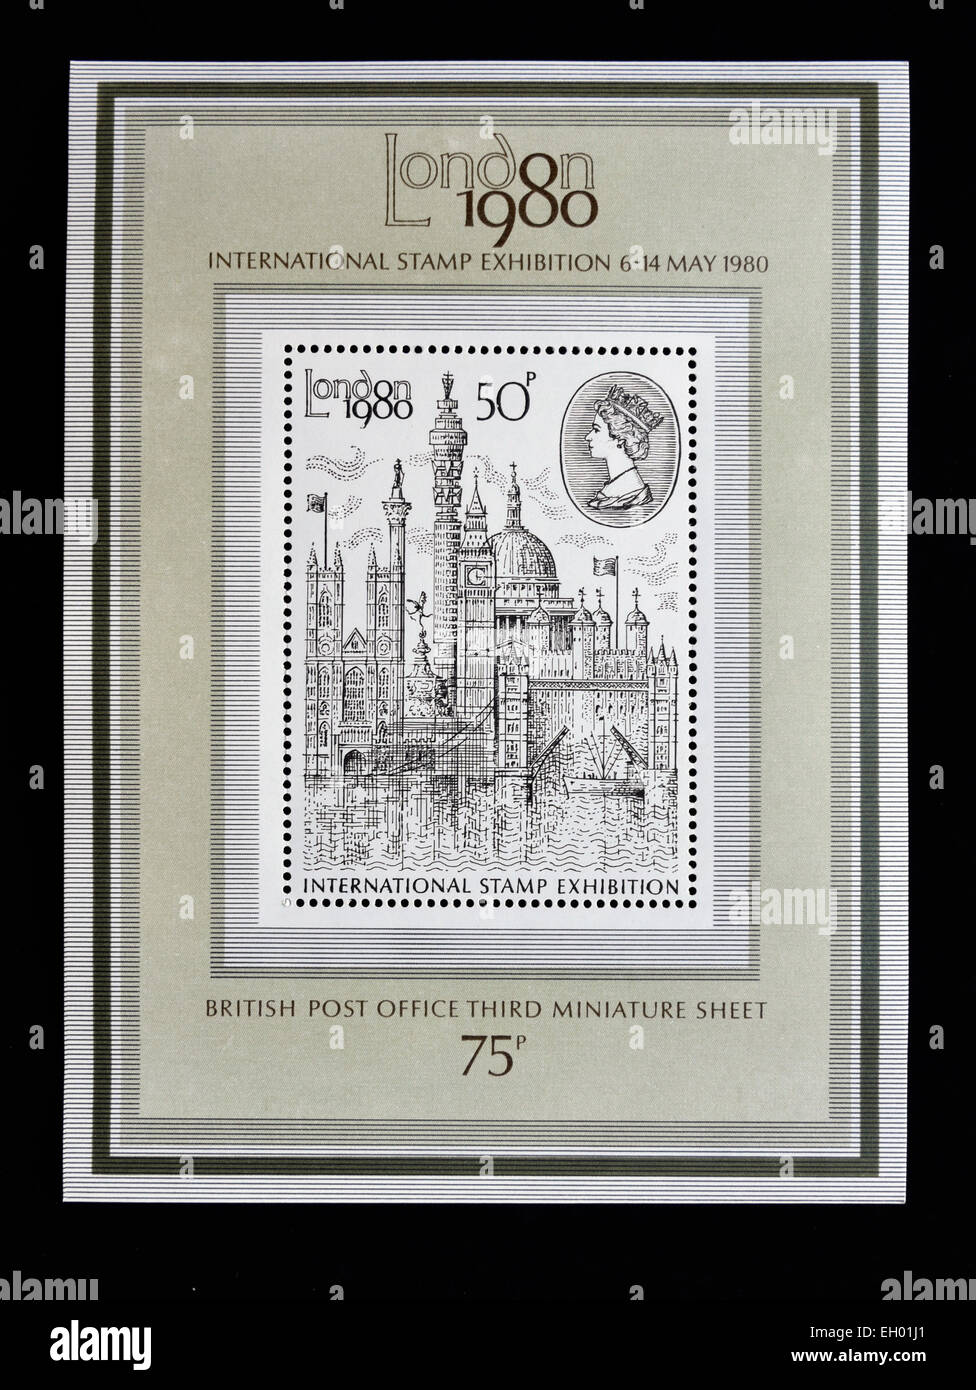 Vintage International Stamps Stock Photo - Download Image Now